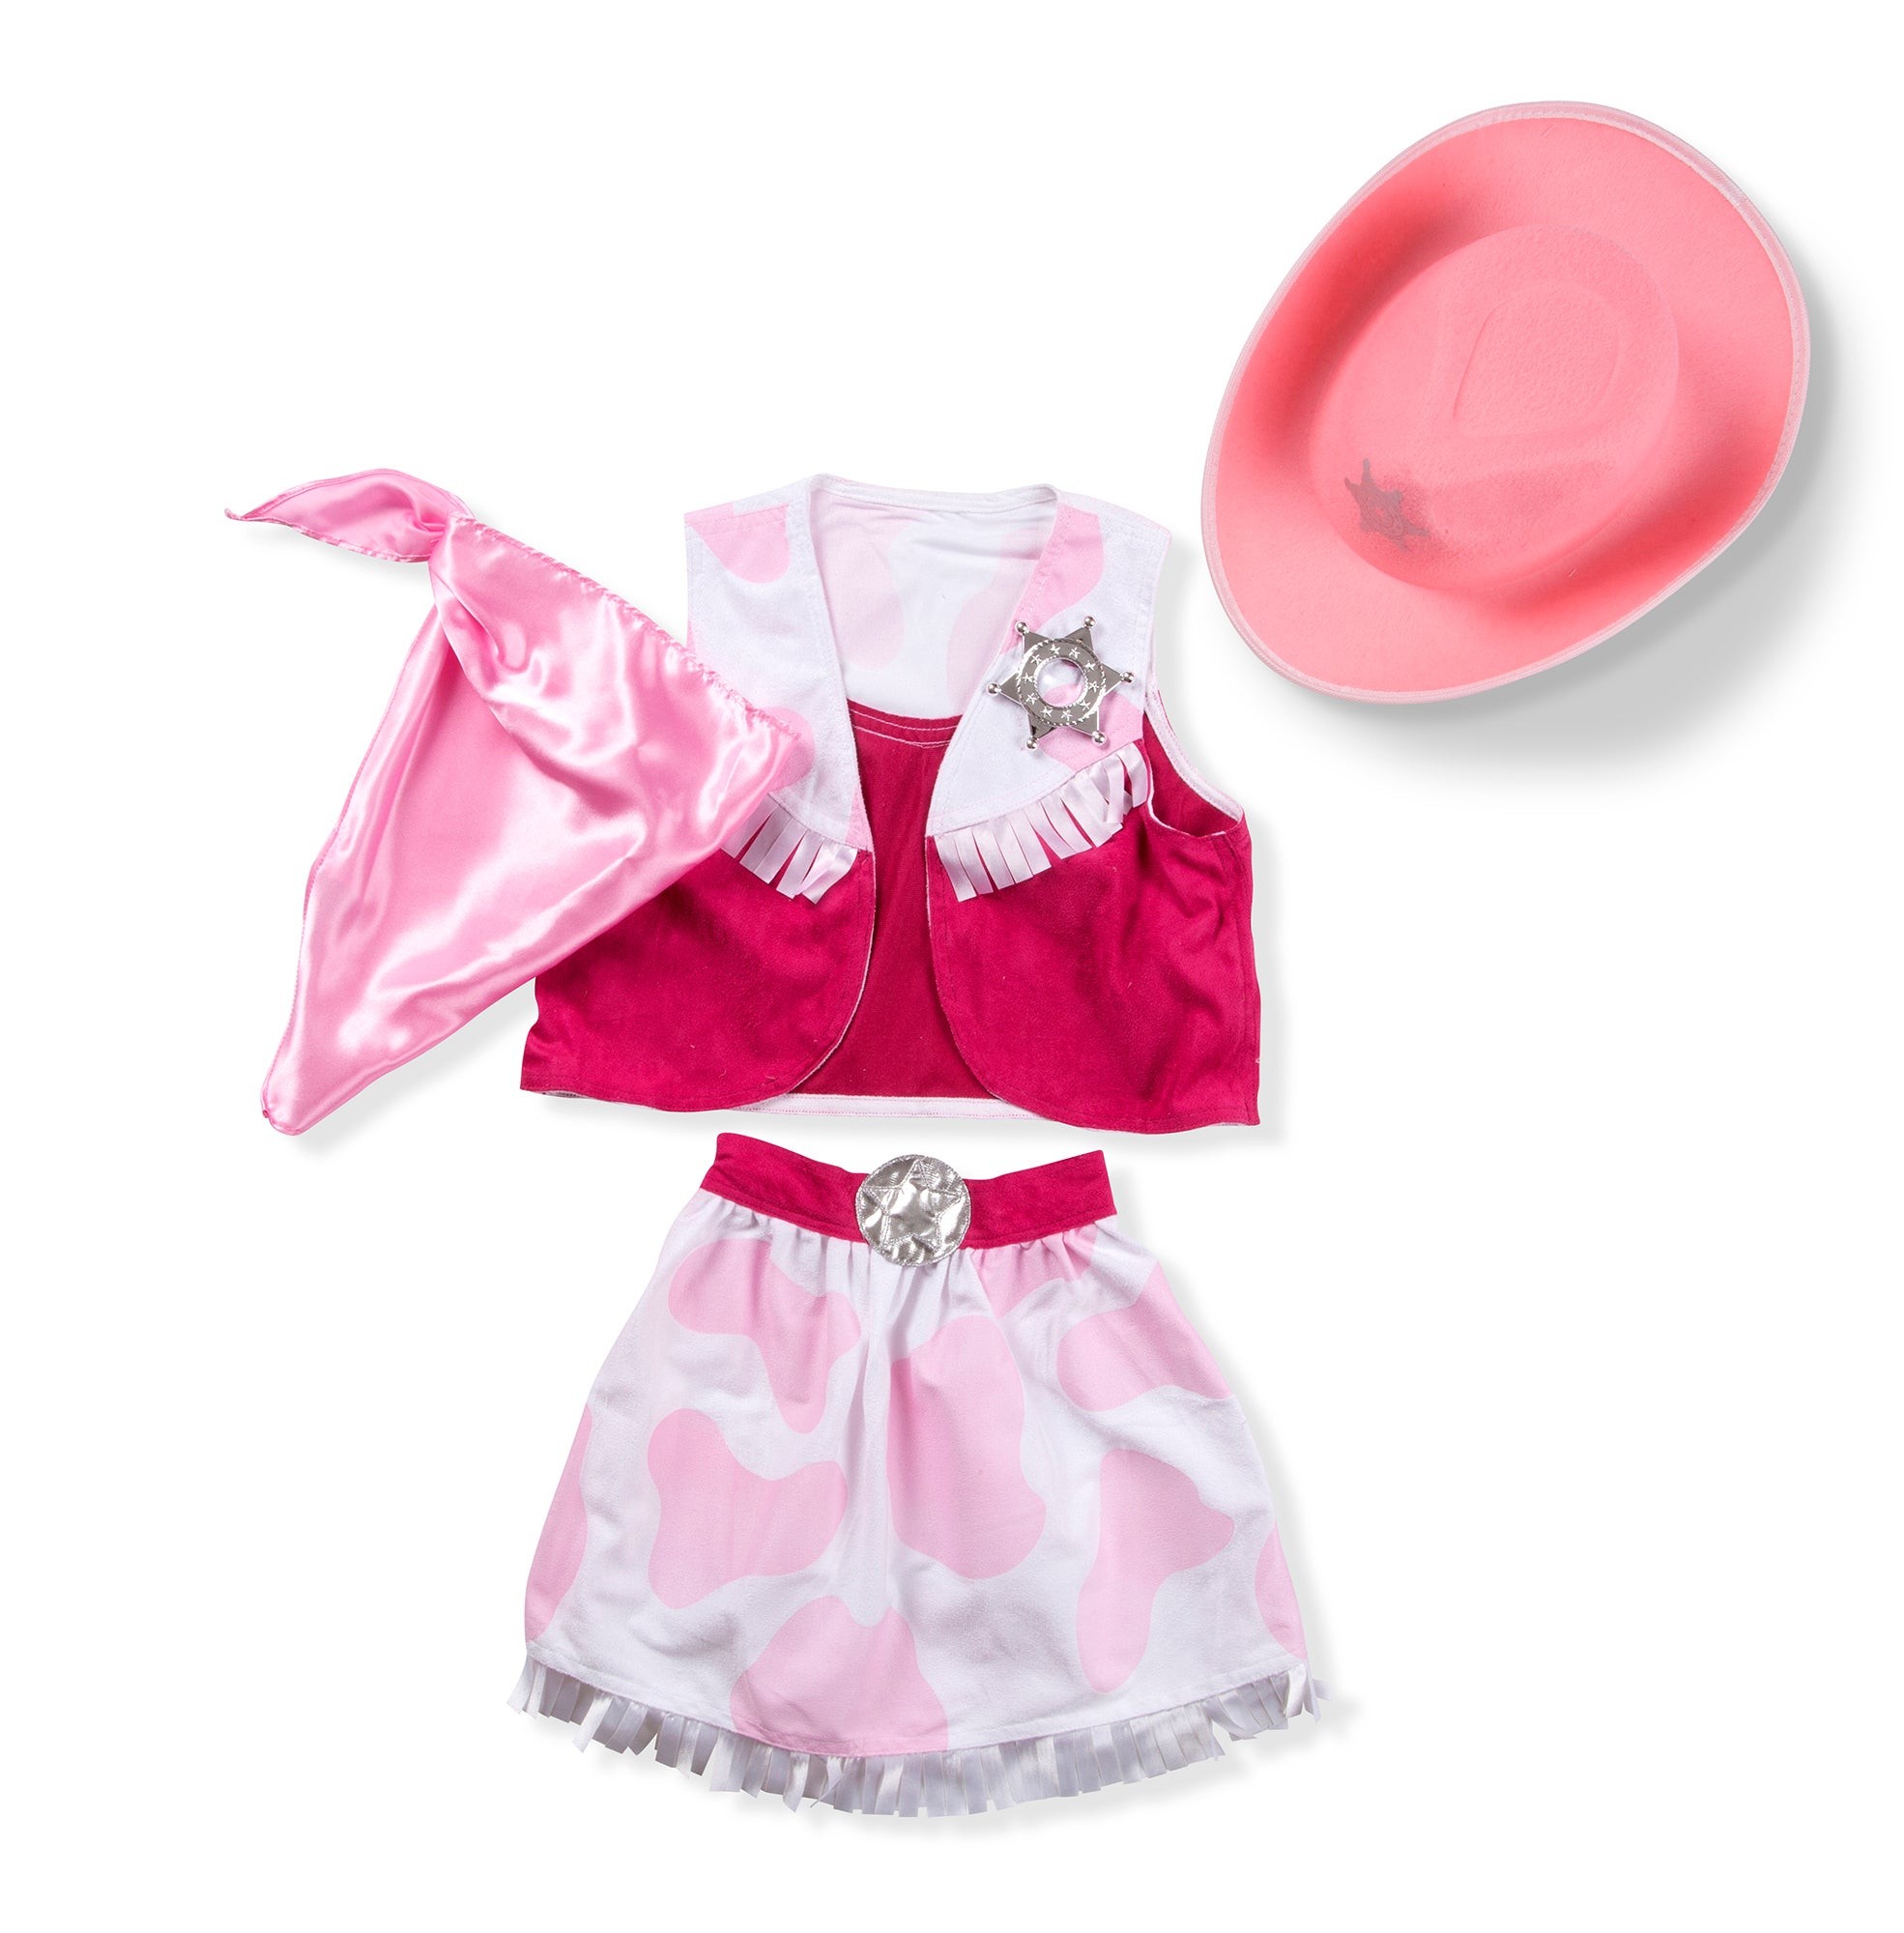 Cowgirl Role Play Costume Set Ages 3-6 Years